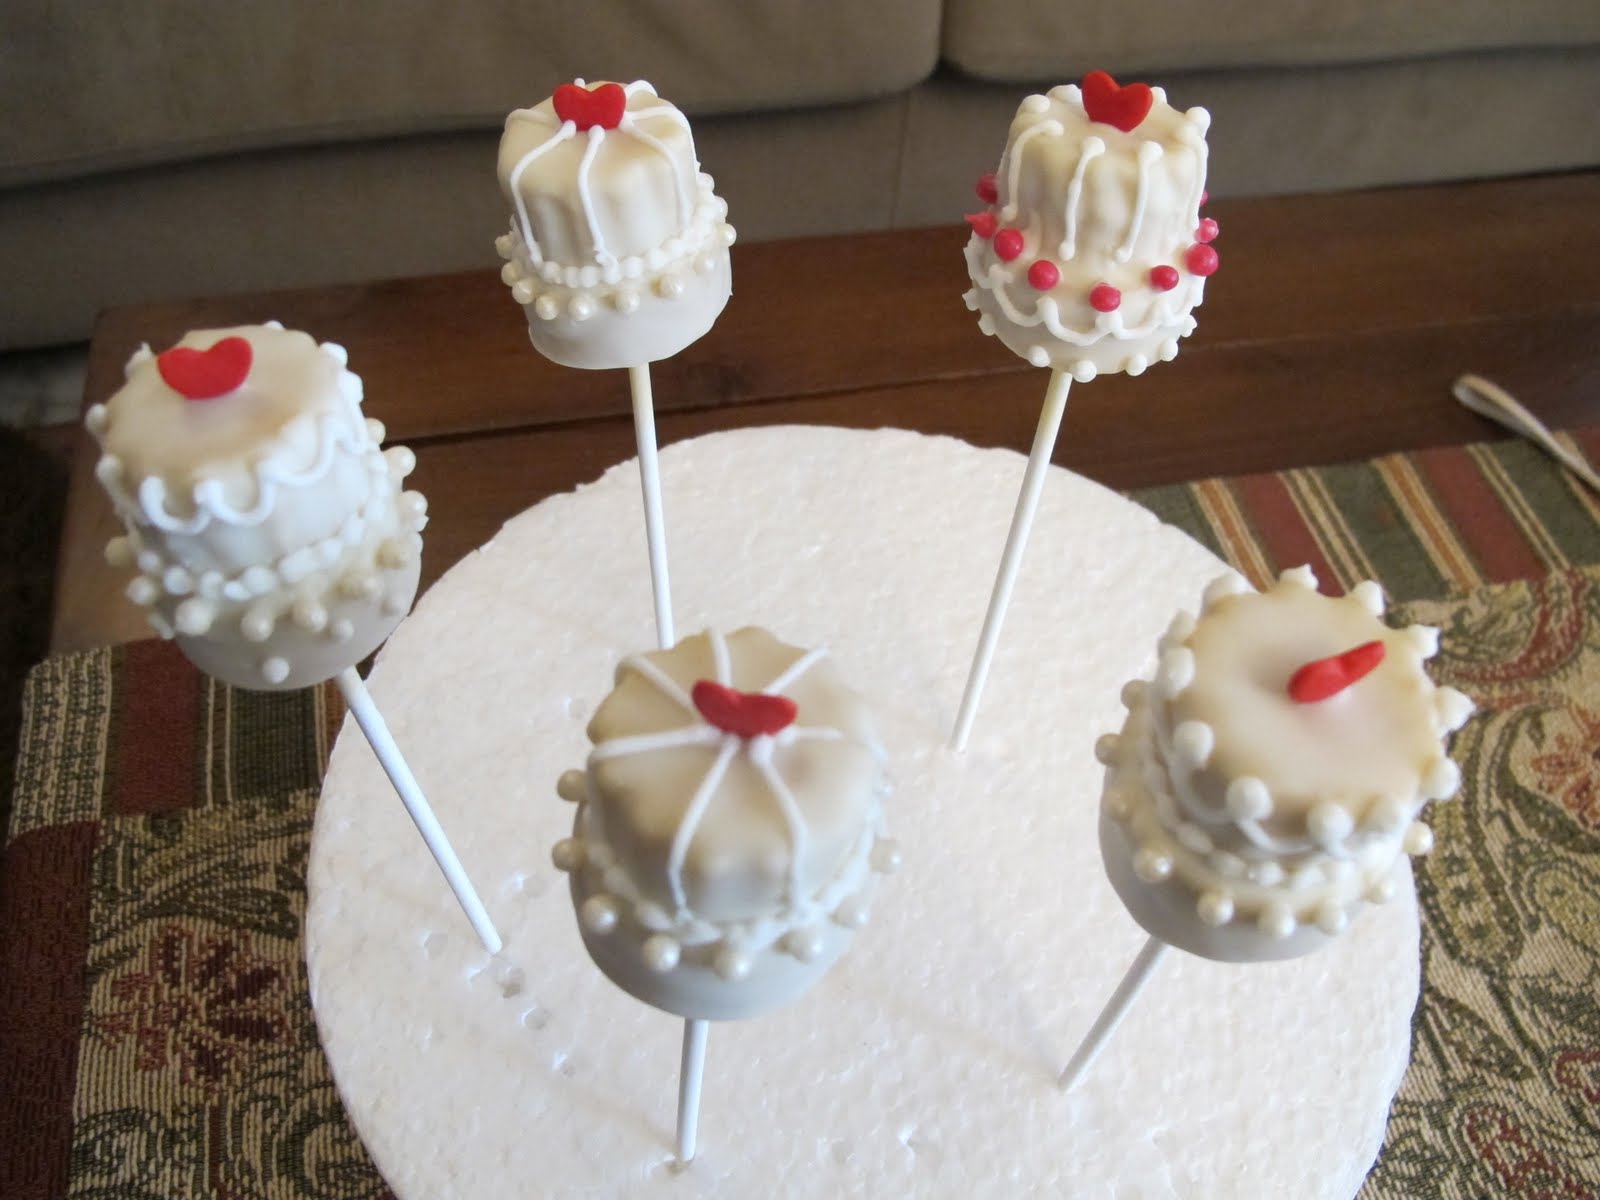 Pink Oven Cakes and Cookies Wedding cake pop